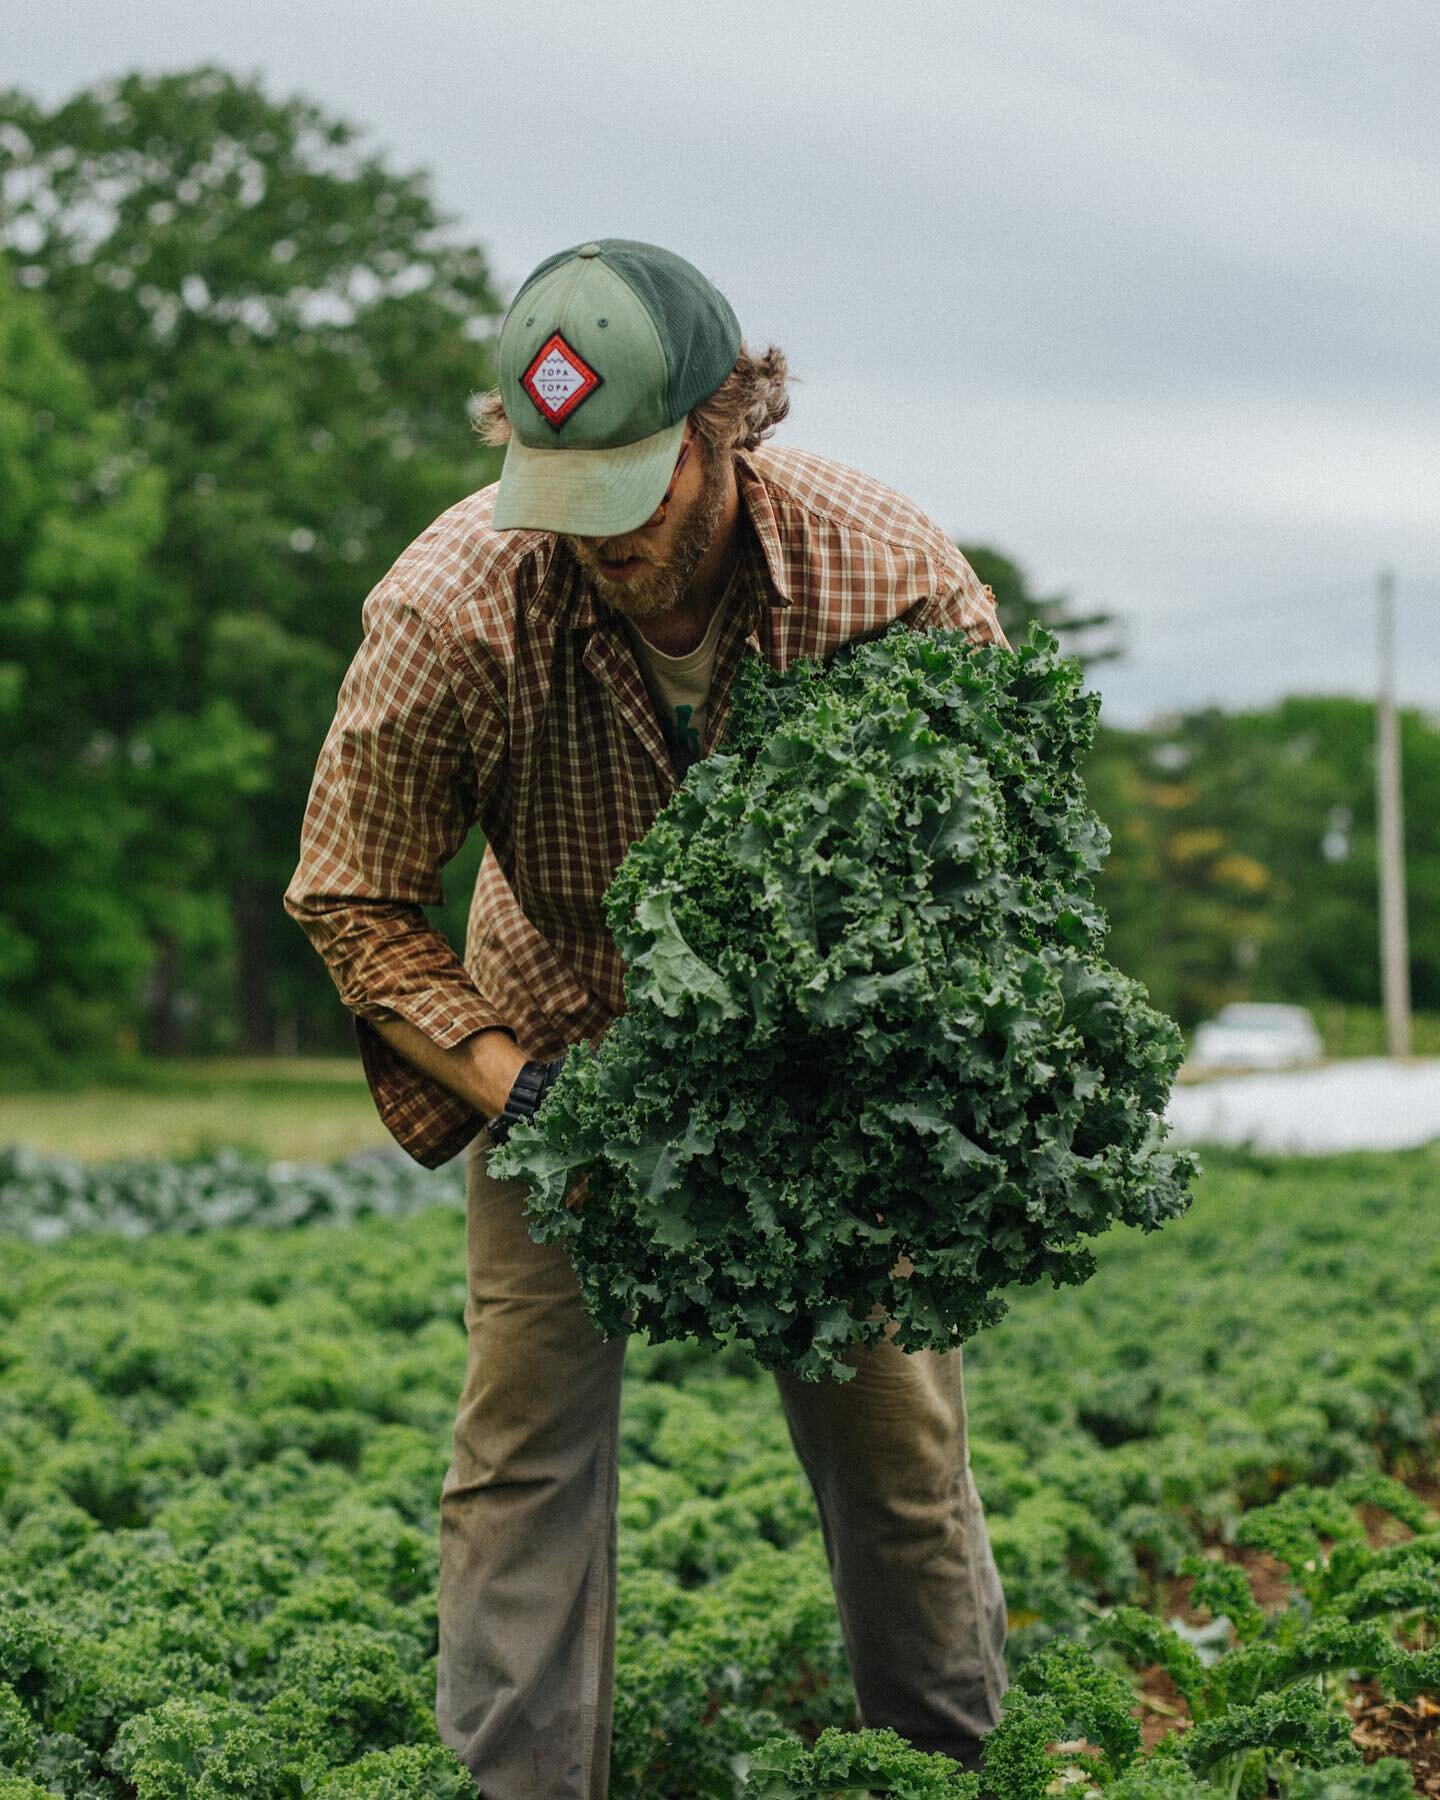 Fall kale is the best kale! After last weeks frost, our fall crops have sweetened up in a big way. We will have loads of bunched greens, cabbages, roots, and other cool weather faves at our farmstand tomorrow from 9am to 1pm here in Windham.